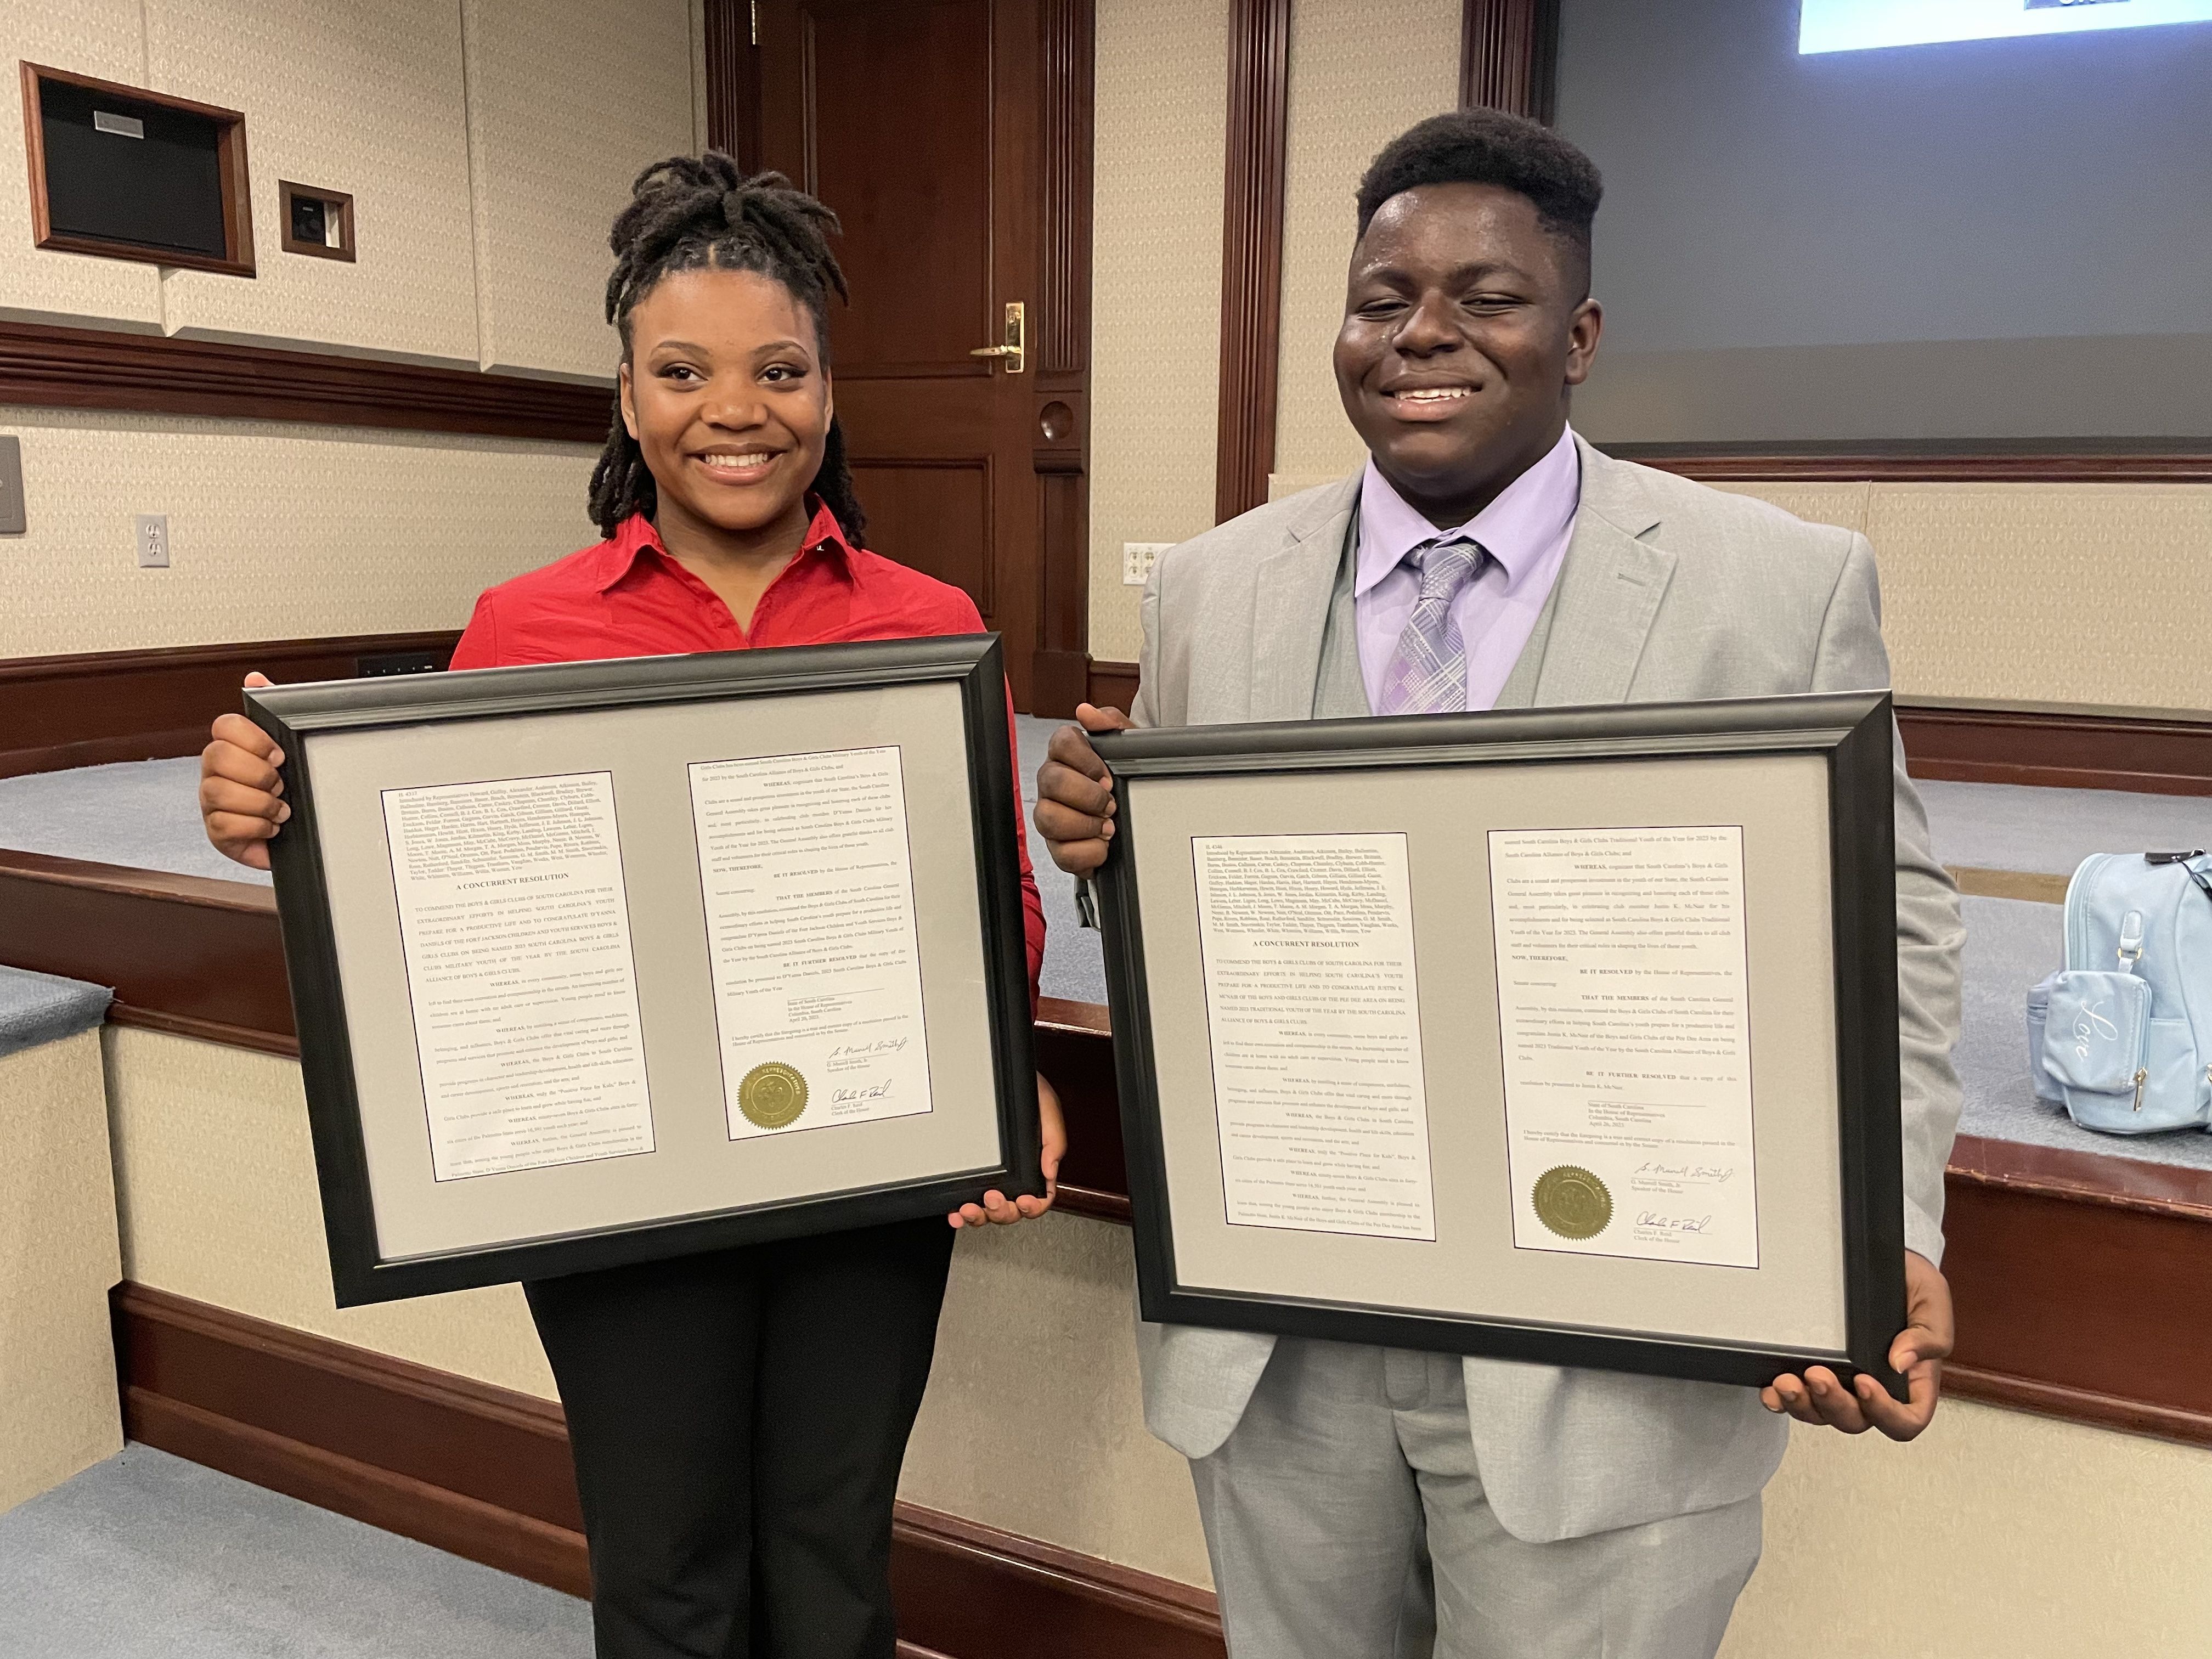 Justin K. McNair of the Boys & Girls Clubs of the Pee Dee Area and D’yanna Daniels of the Fort Jackson Children and Youth Services Boys & Girls Clubs were named Traditional Youth of the Year and Military Youth of the Year respectively.